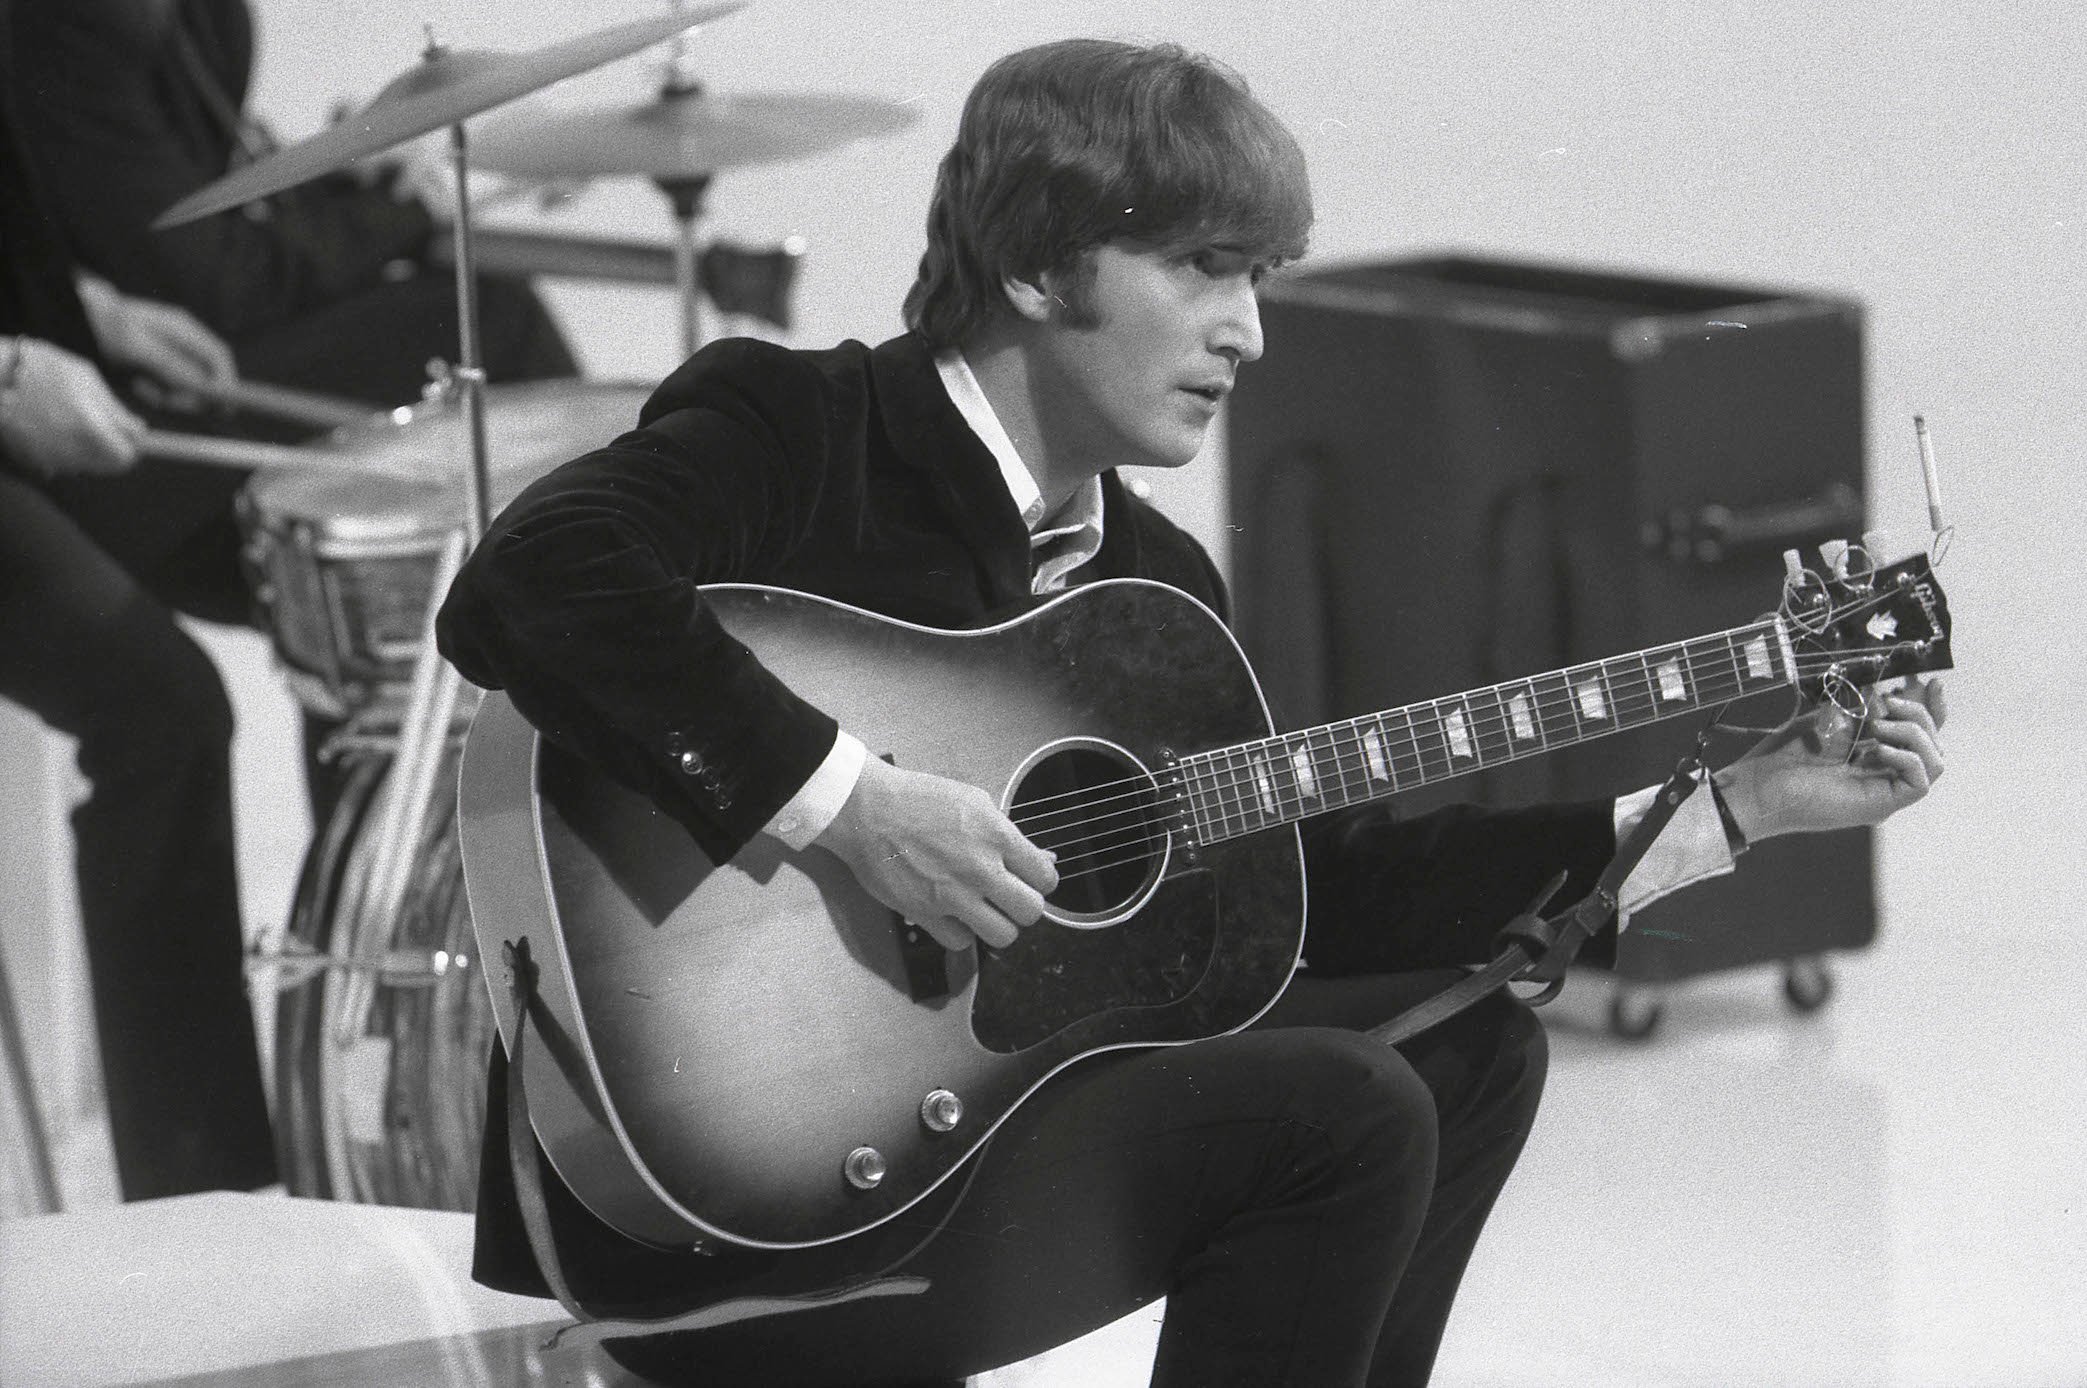 John Lennon of The Beatles tuning his guitar while filming 'A Hard Day's Night'